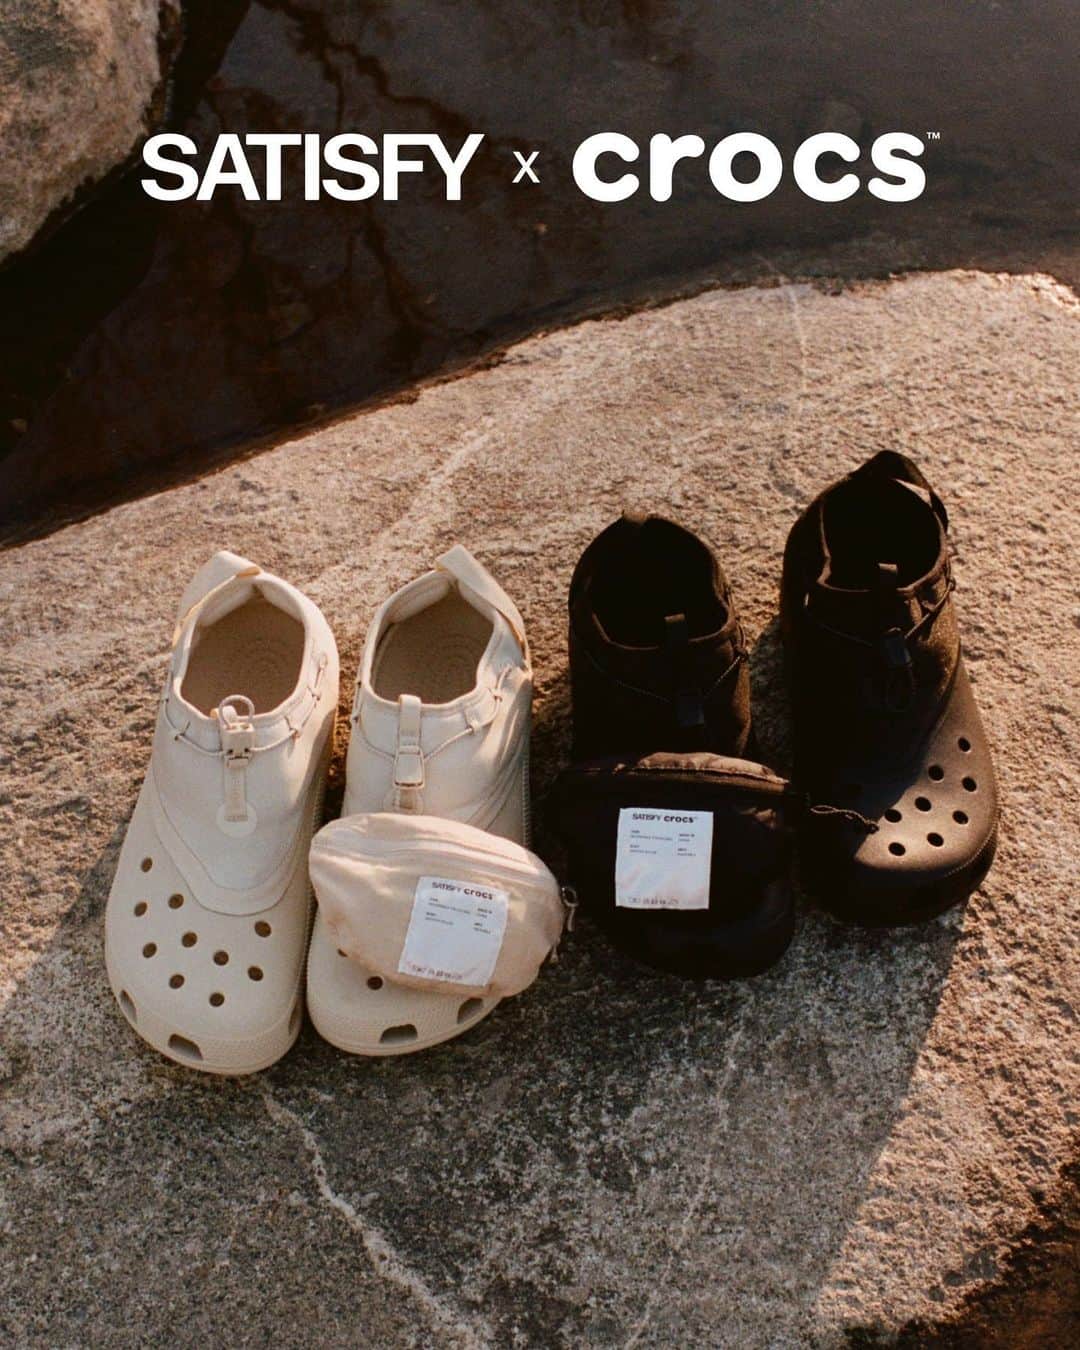 アトモスさんのインスタグラム写真 - (アトモスInstagram)「. crocs × Satisfy Classic Clog  crocsからパリ発のランニングブランド「Satisfy」とのコラボレーションサンダルが登場。 Satisfyは、セレクトショップ「April 77」の創設者として知られる元スケートボーダー Brice Partouche（リース・パルトゥーシュ）が、2015年に立ち上げたブランド。 今回のコラボレーションでは、crocs Hydroから着想を得た新しいClassic clogスタイルに、ウルトラマラソンの要素を融合して開発　商品の特徴として、Classic Clogをベースに、柔軟性の高いネオプレーン素材を採用した履き口を装着　アッパーには、パッカブルナイロンバッグJIBBITZが付属し、ダストバッグやシューズ袋、ユーザーのアイデアで多様に活用が可能。 本商品は現在atmos オンラインにて発売中。  Collaboration sandals with the running brand "Satisfy" from Paris are now available from crocs. Satisfy is a brand launched in 2015 by former skateboarder Brice Partouche, known as the founder of the select shop "April 77". In this collaboration, we have developed a new Classic clog style inspired by crocs Hydro by combining the elements of ultramarathons.The product features a Classic Clog base with a highly flexible neoprene material. Attachment: The upper comes with a packable nylon bag, JIBBITZ, which can be used in a variety of ways, such as a dust bag or shoe bag. This product is currently on sale at atmos online.  #atmos#crocs#Satisfy」5月25日 16時33分 - atmos_japan